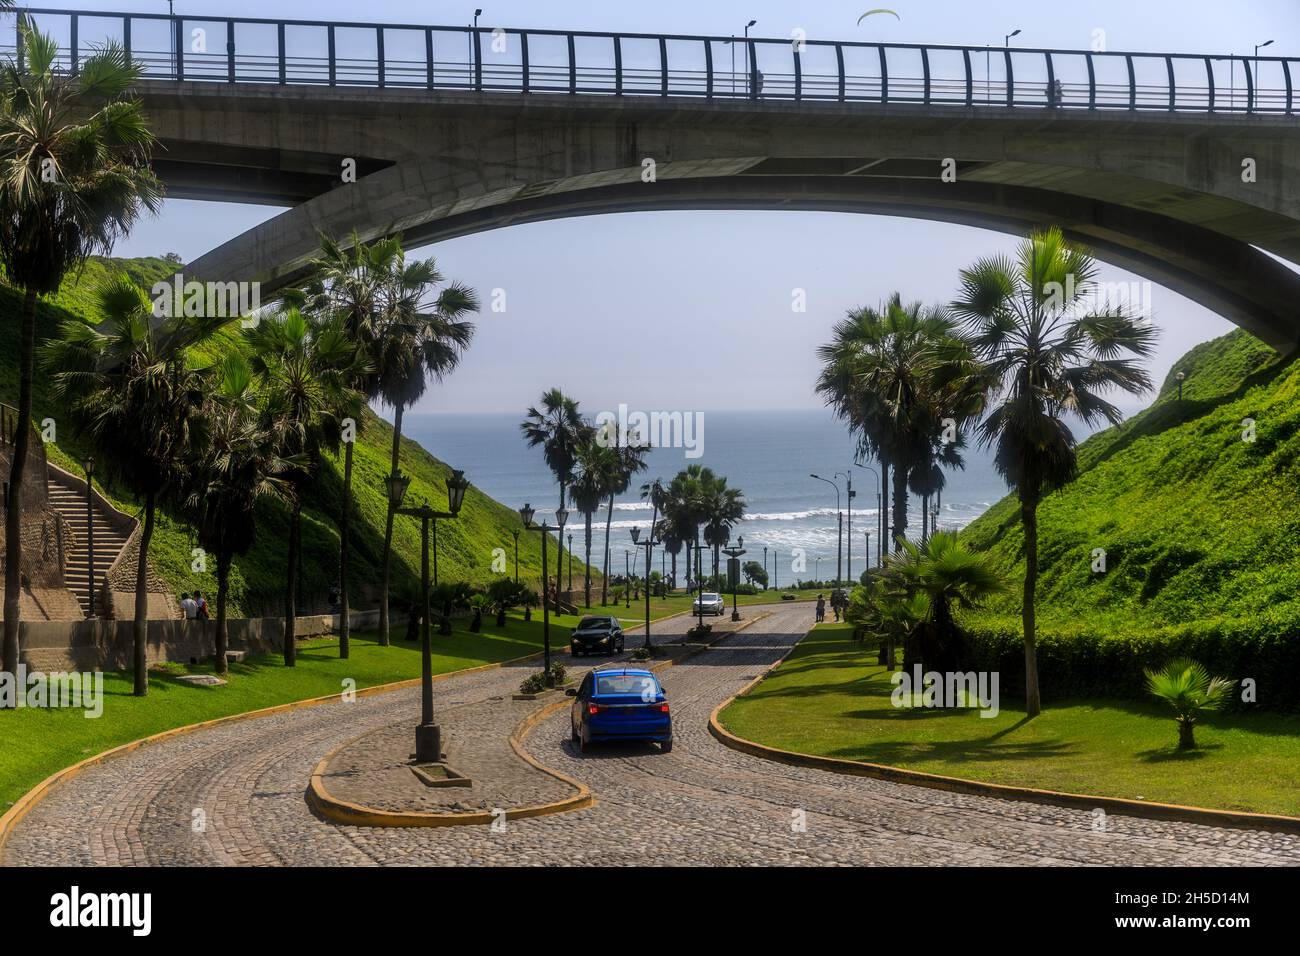 Amazing daytime view of Villena Rey Bridge with Pacific Ocean in background in Miraflores District from Lima, Peru Stock Photo